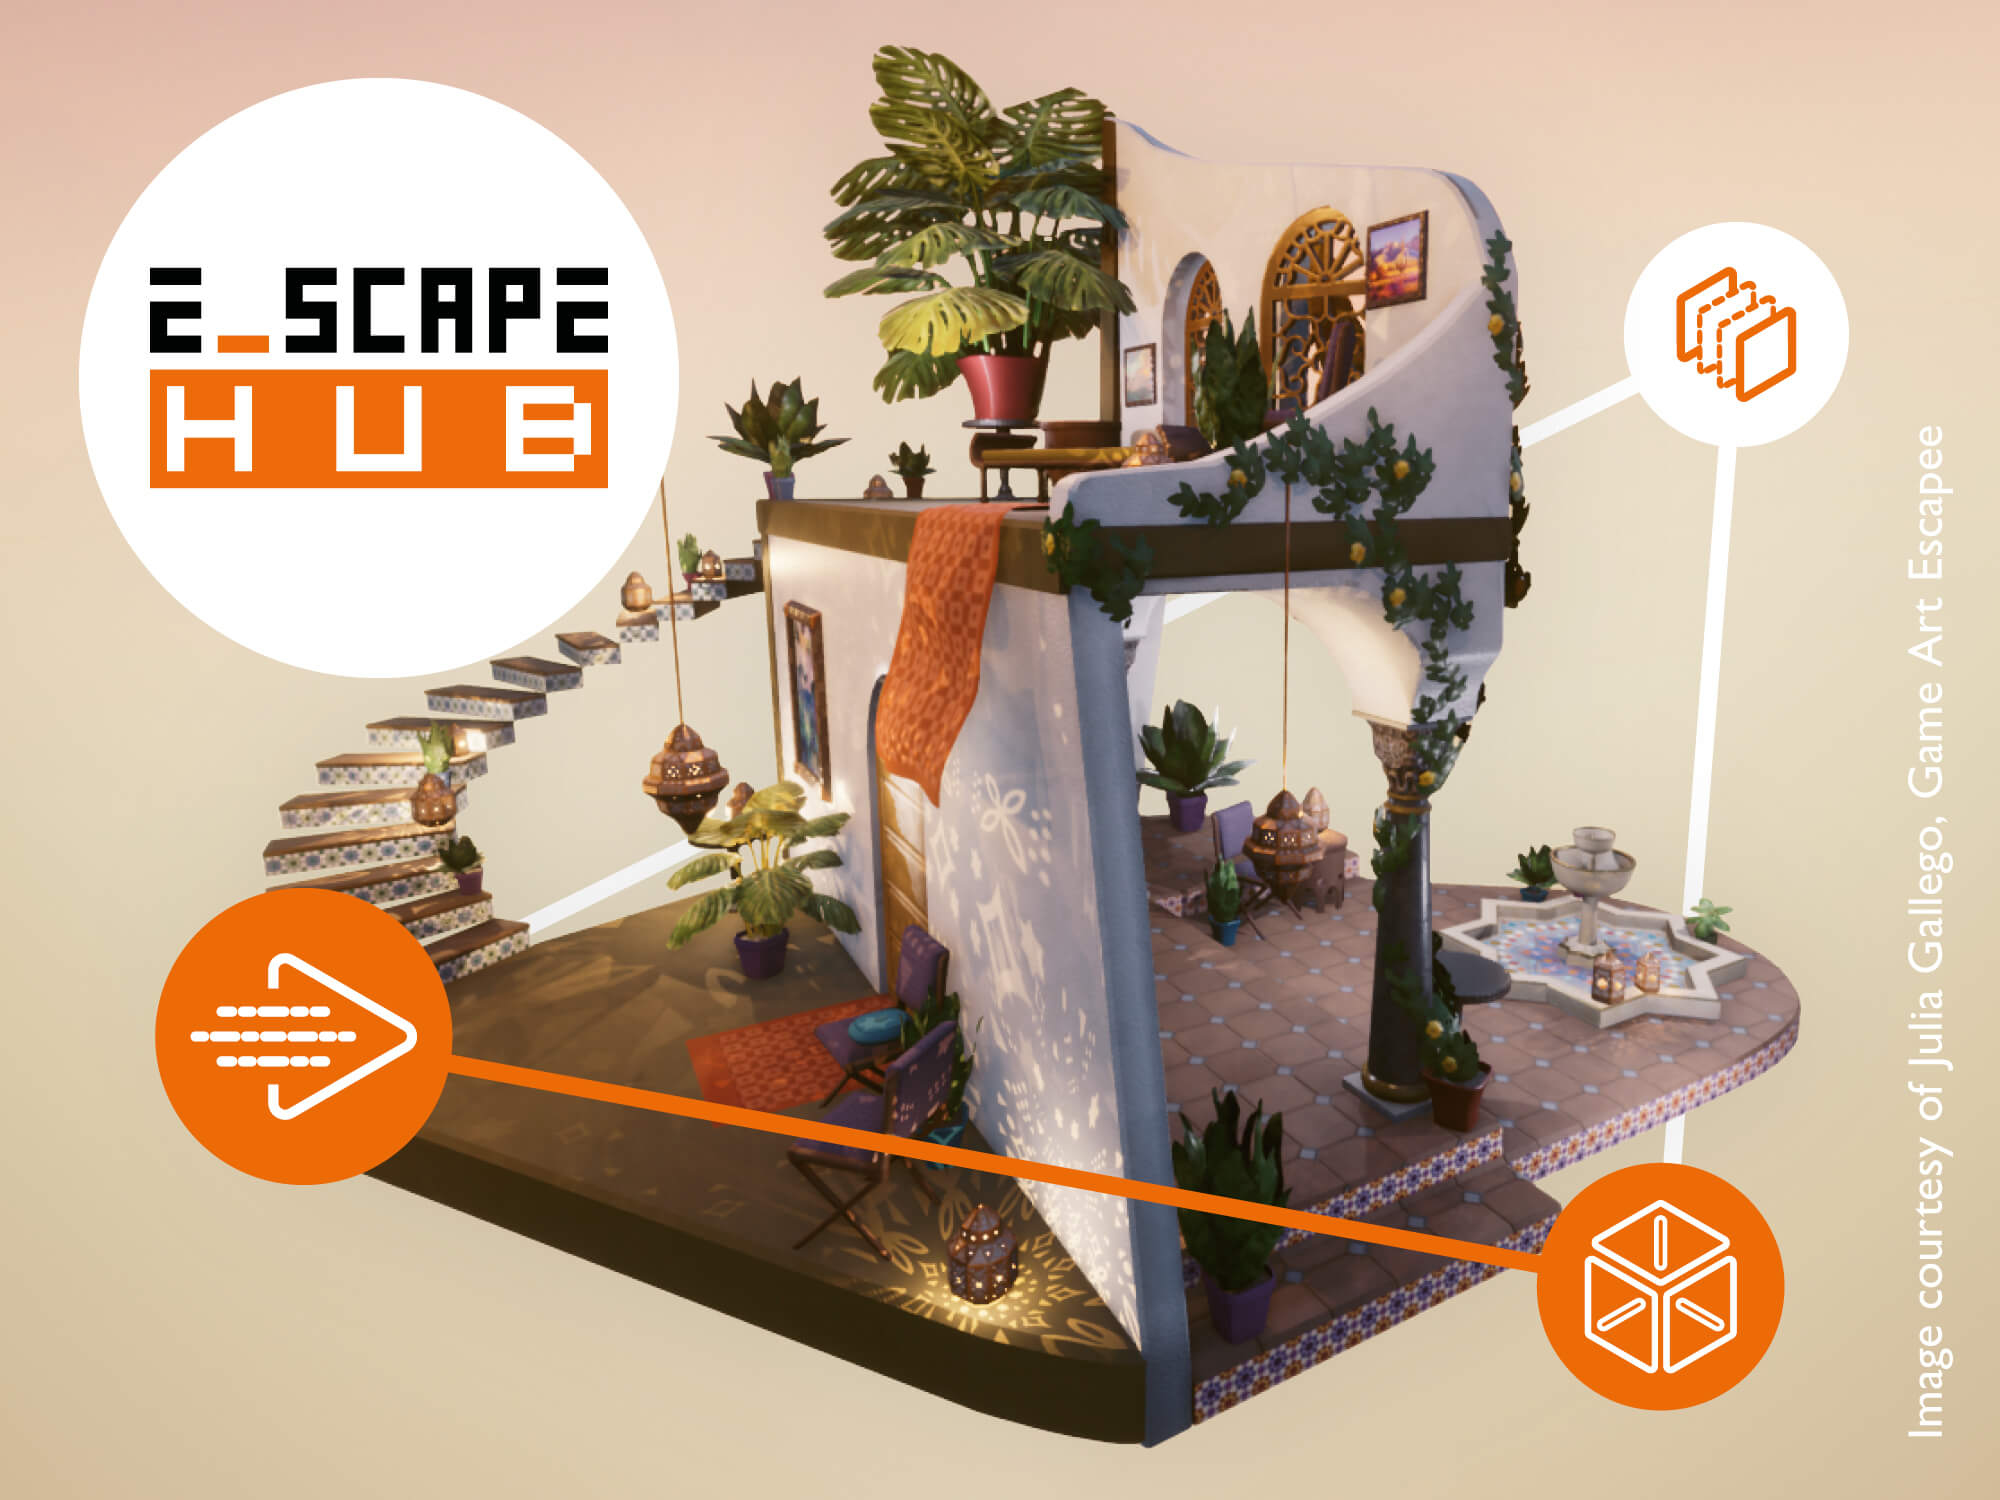 Video games diorama of a moroccan house with E_scape hub title